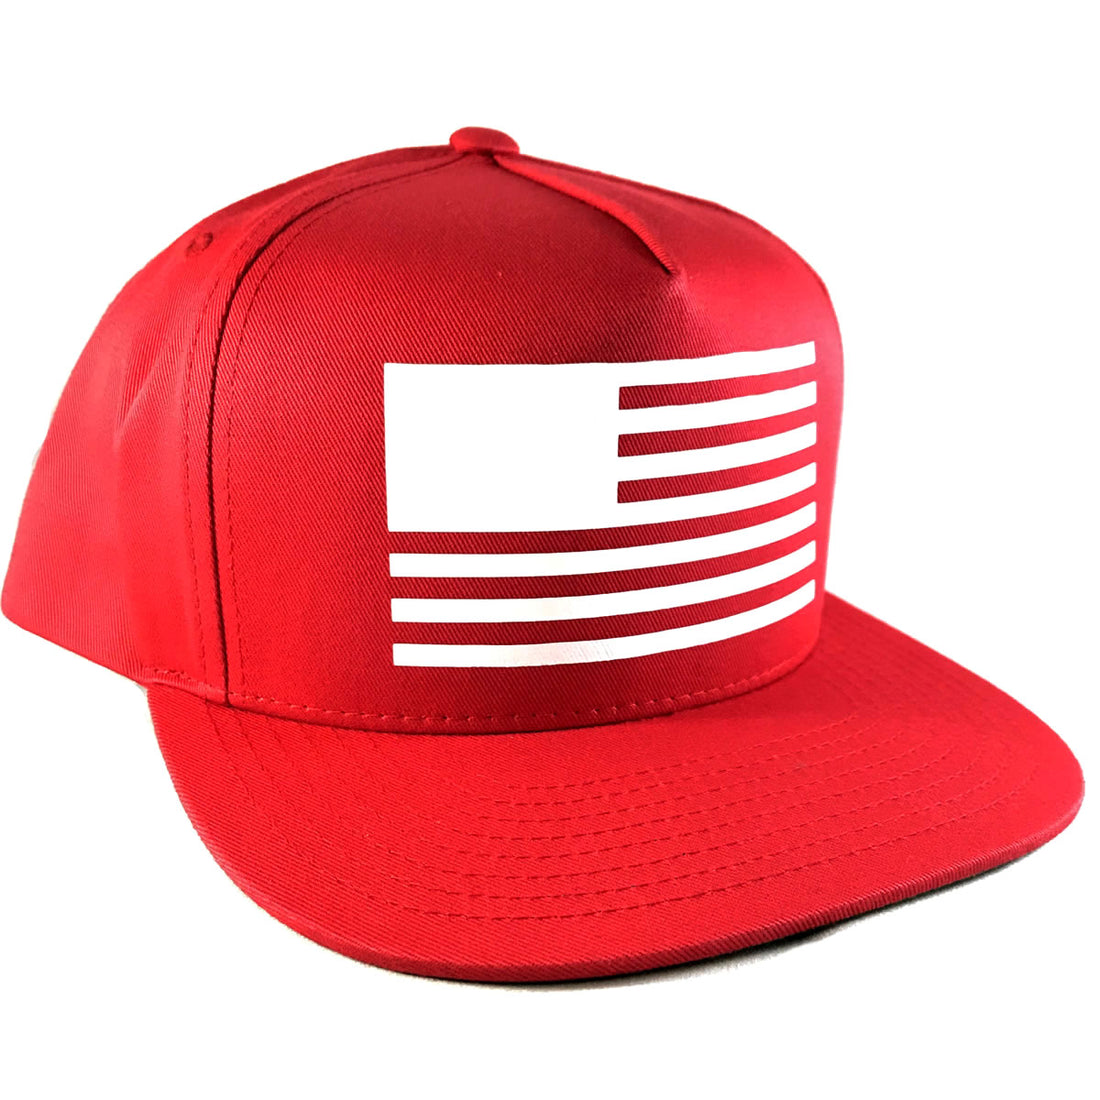 American Flag United States Mens Snapback Hat Cap Red